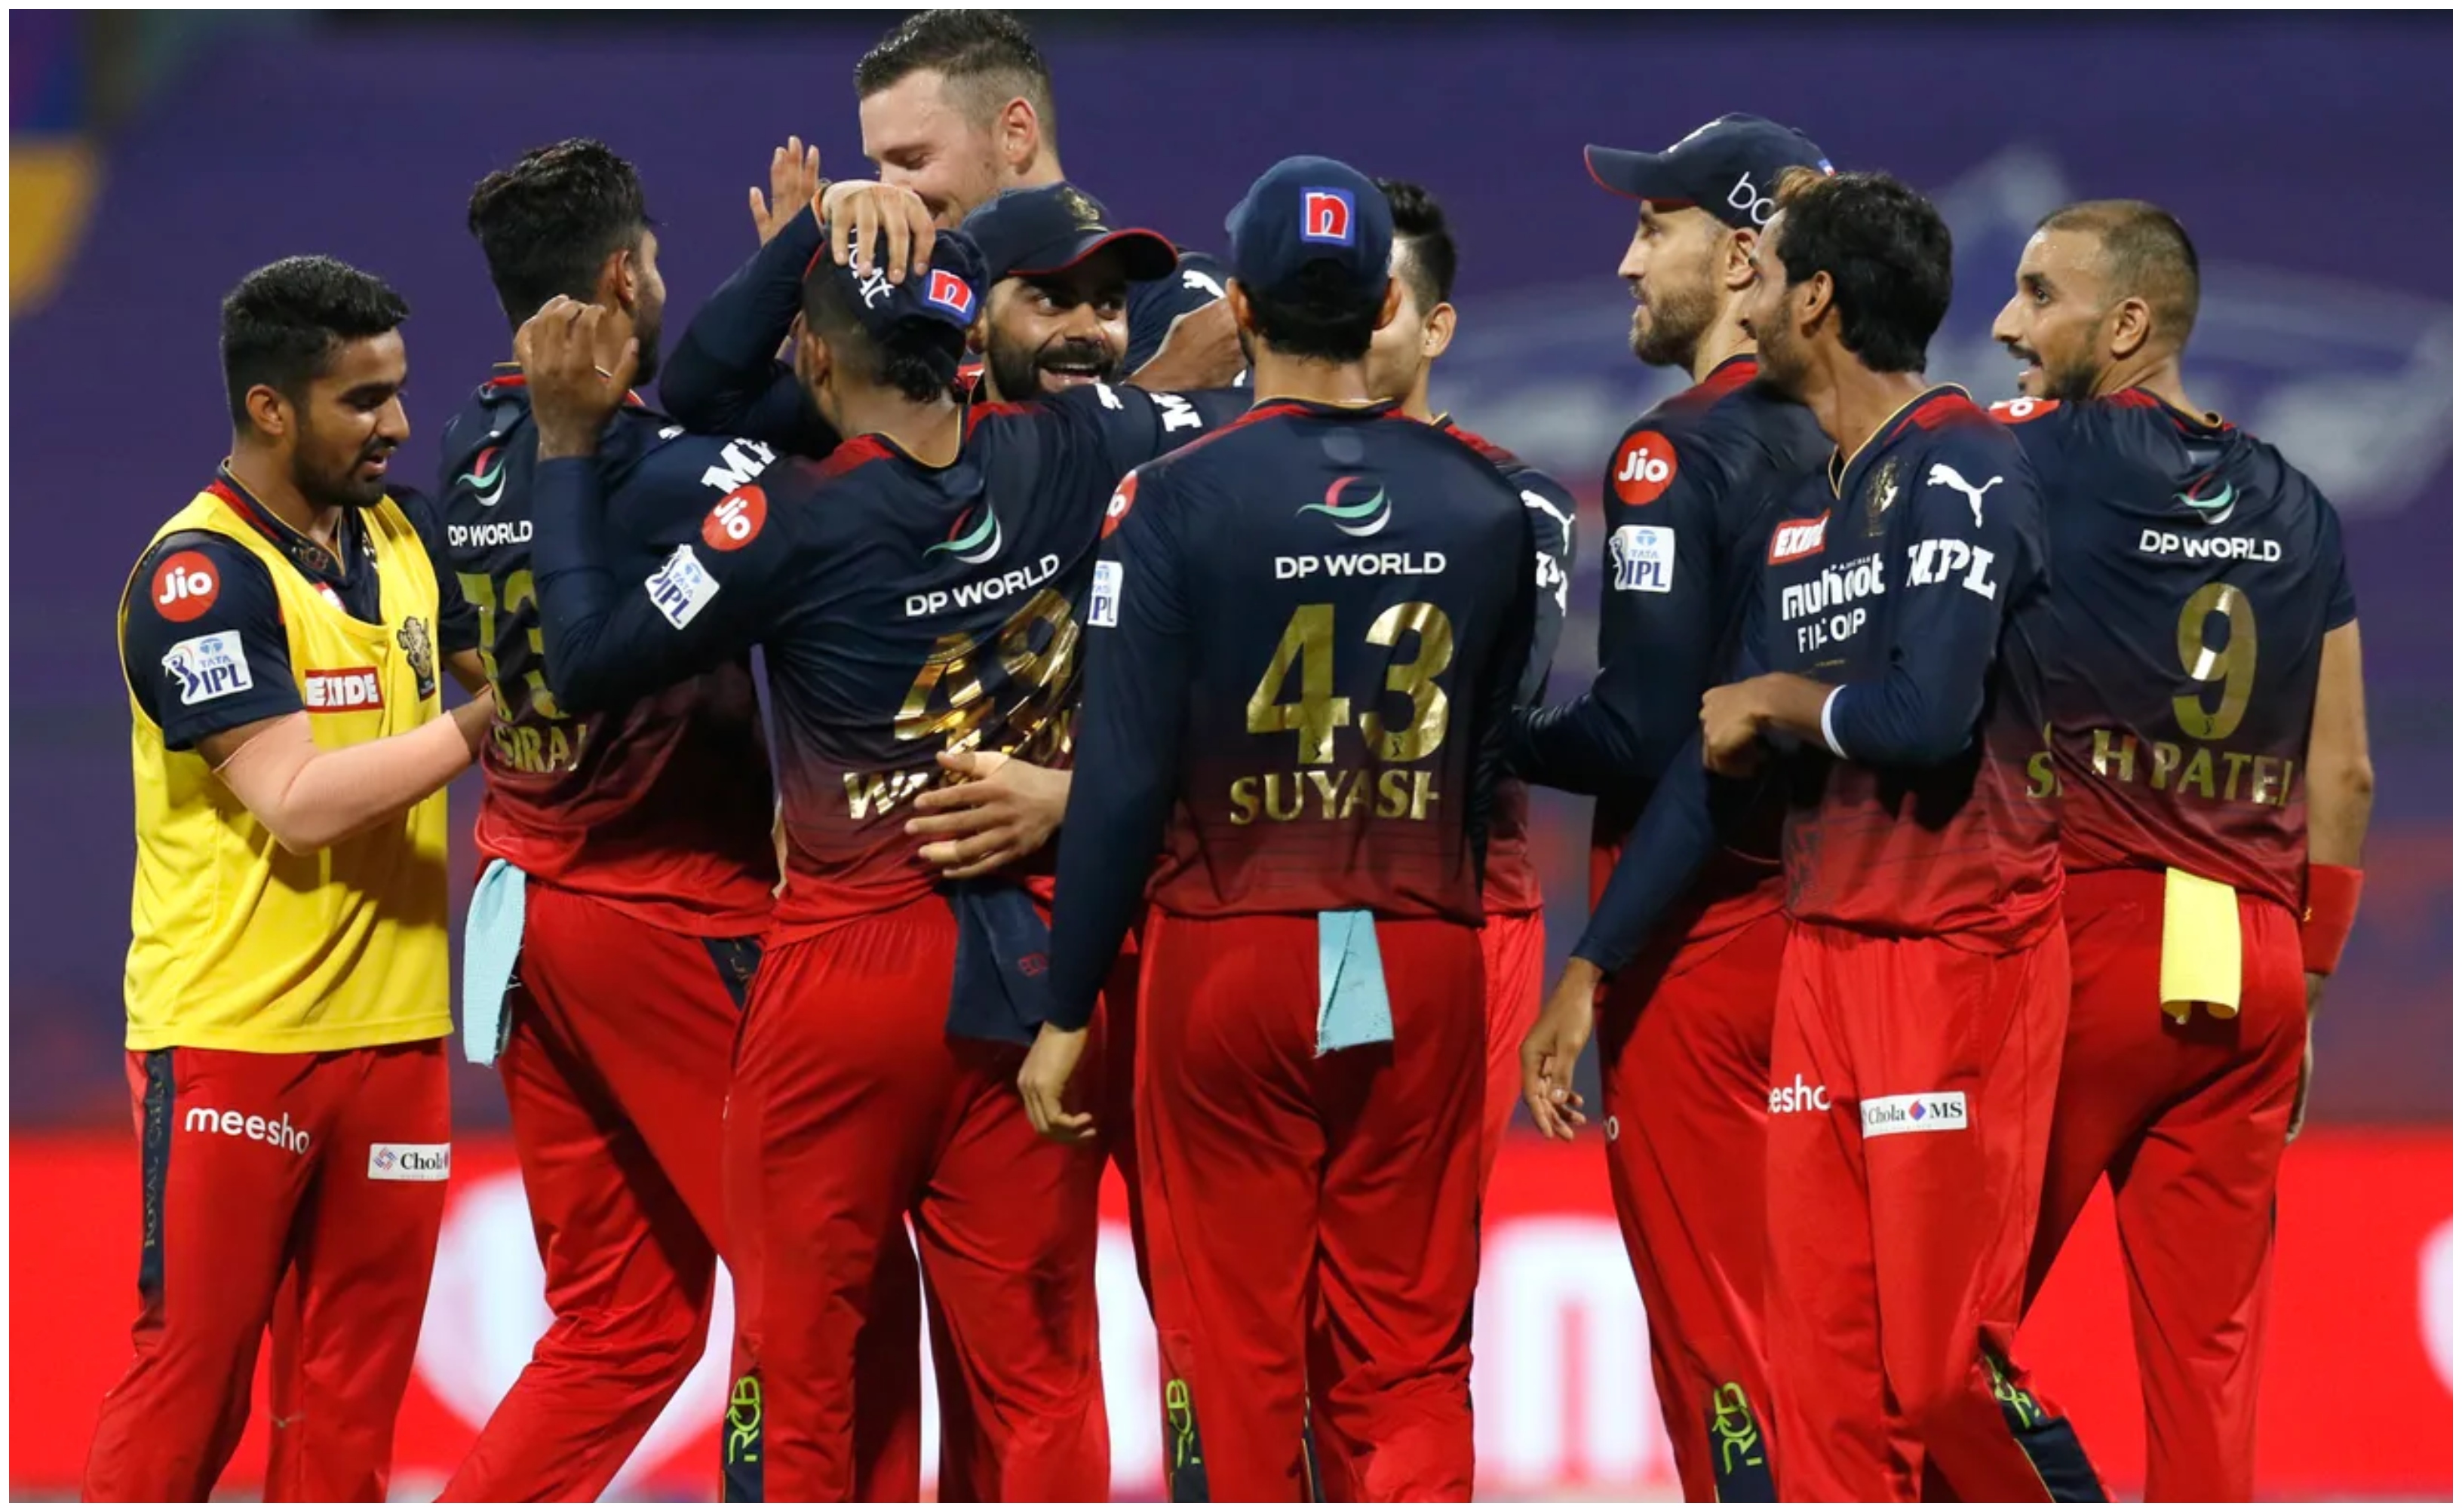 RCB defeated DC by 16 runs | BCCI/IPL